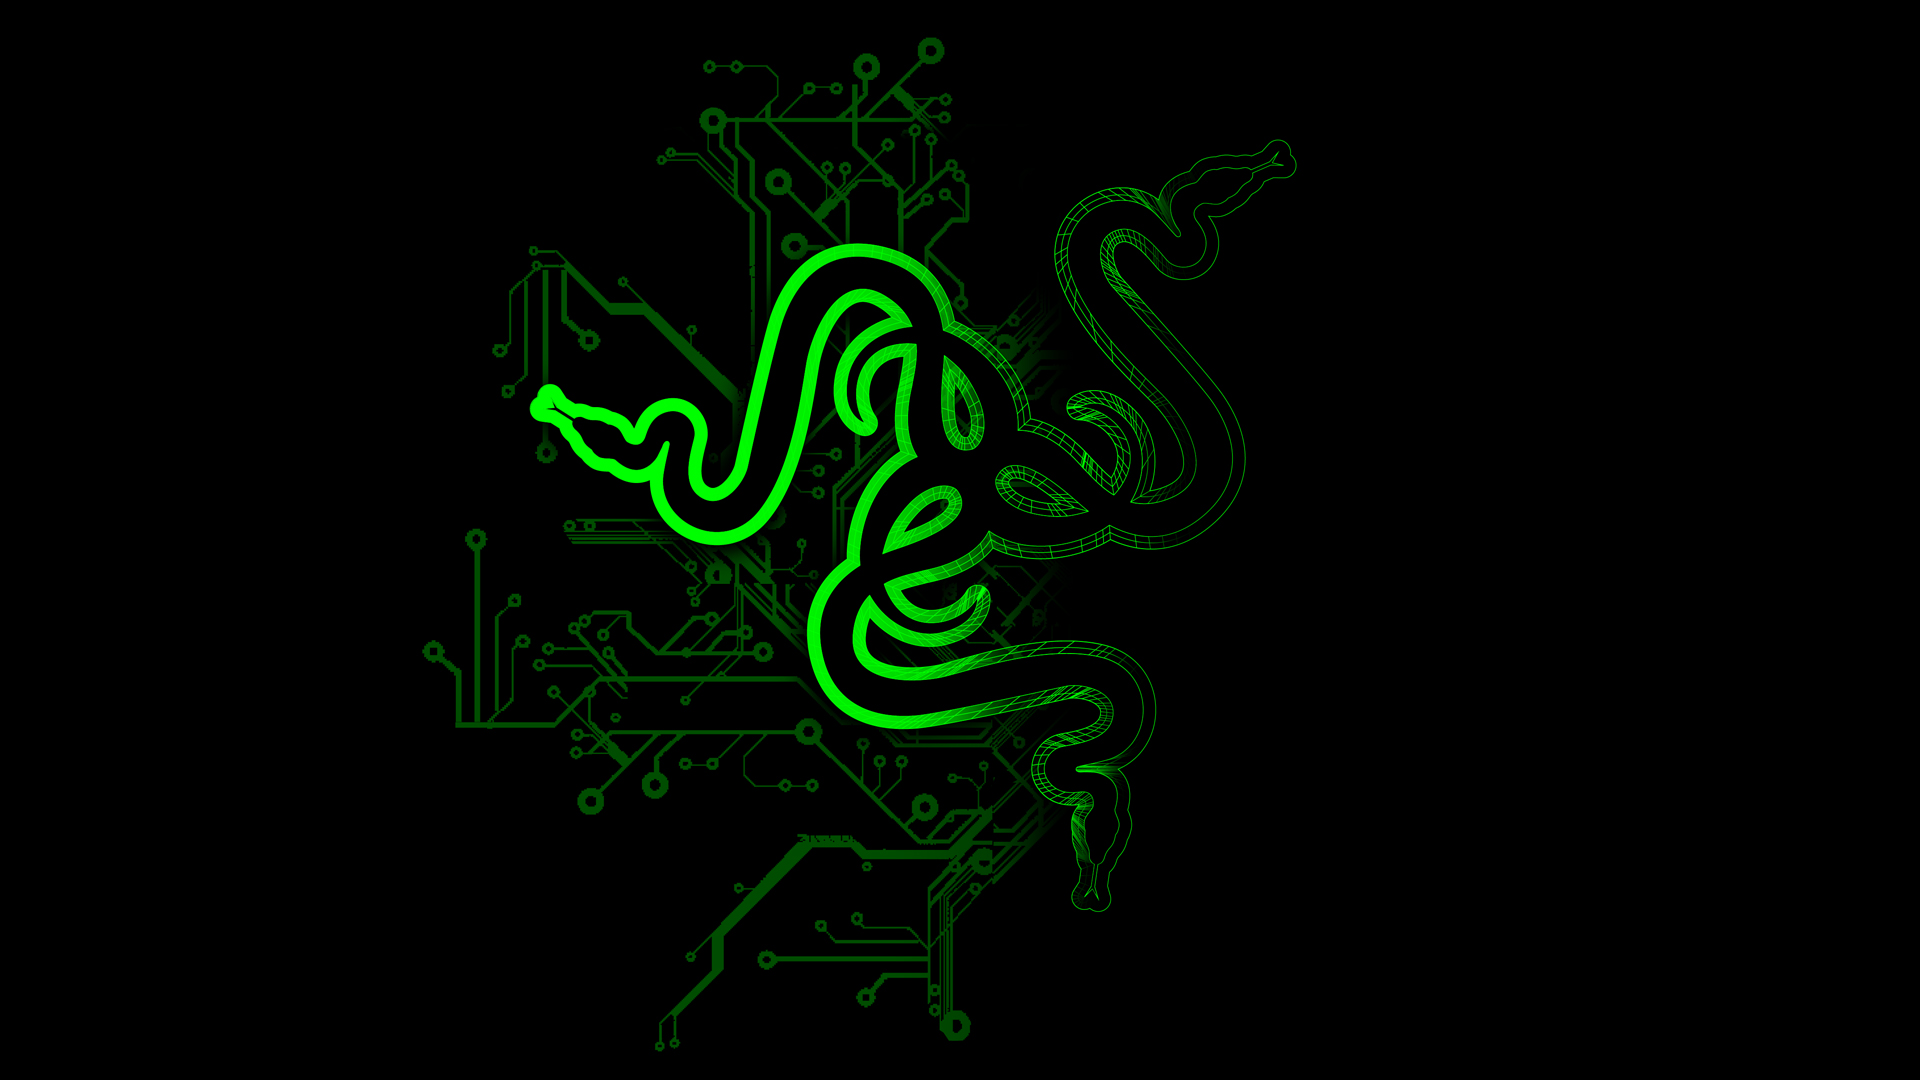 Mine Are Razer Desktop Wallpaper The First One For My Laptop